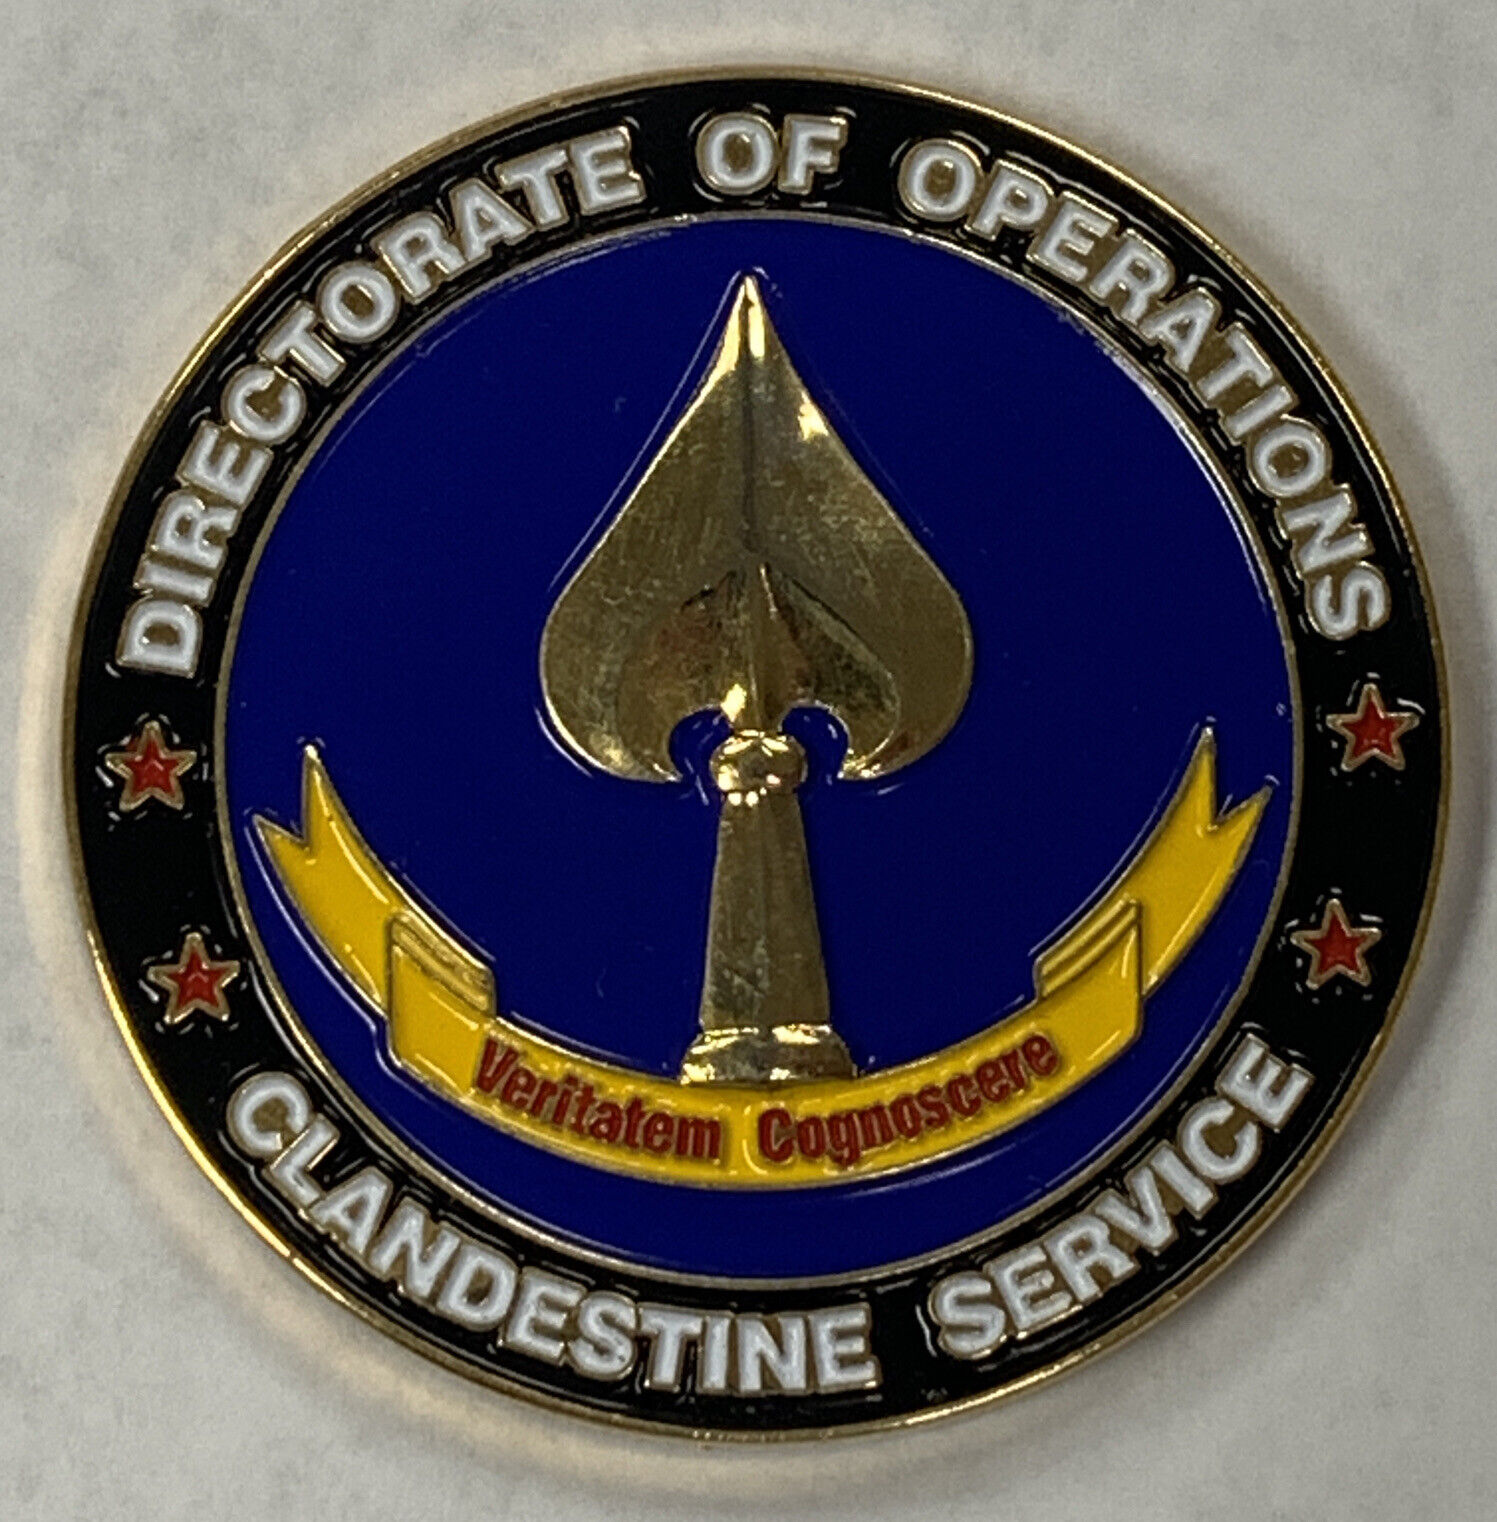 CIA, DIRECTORATE OF OPERATIONS ,CENTRAL EURASIA DIVISION  CHALLENGE COIN